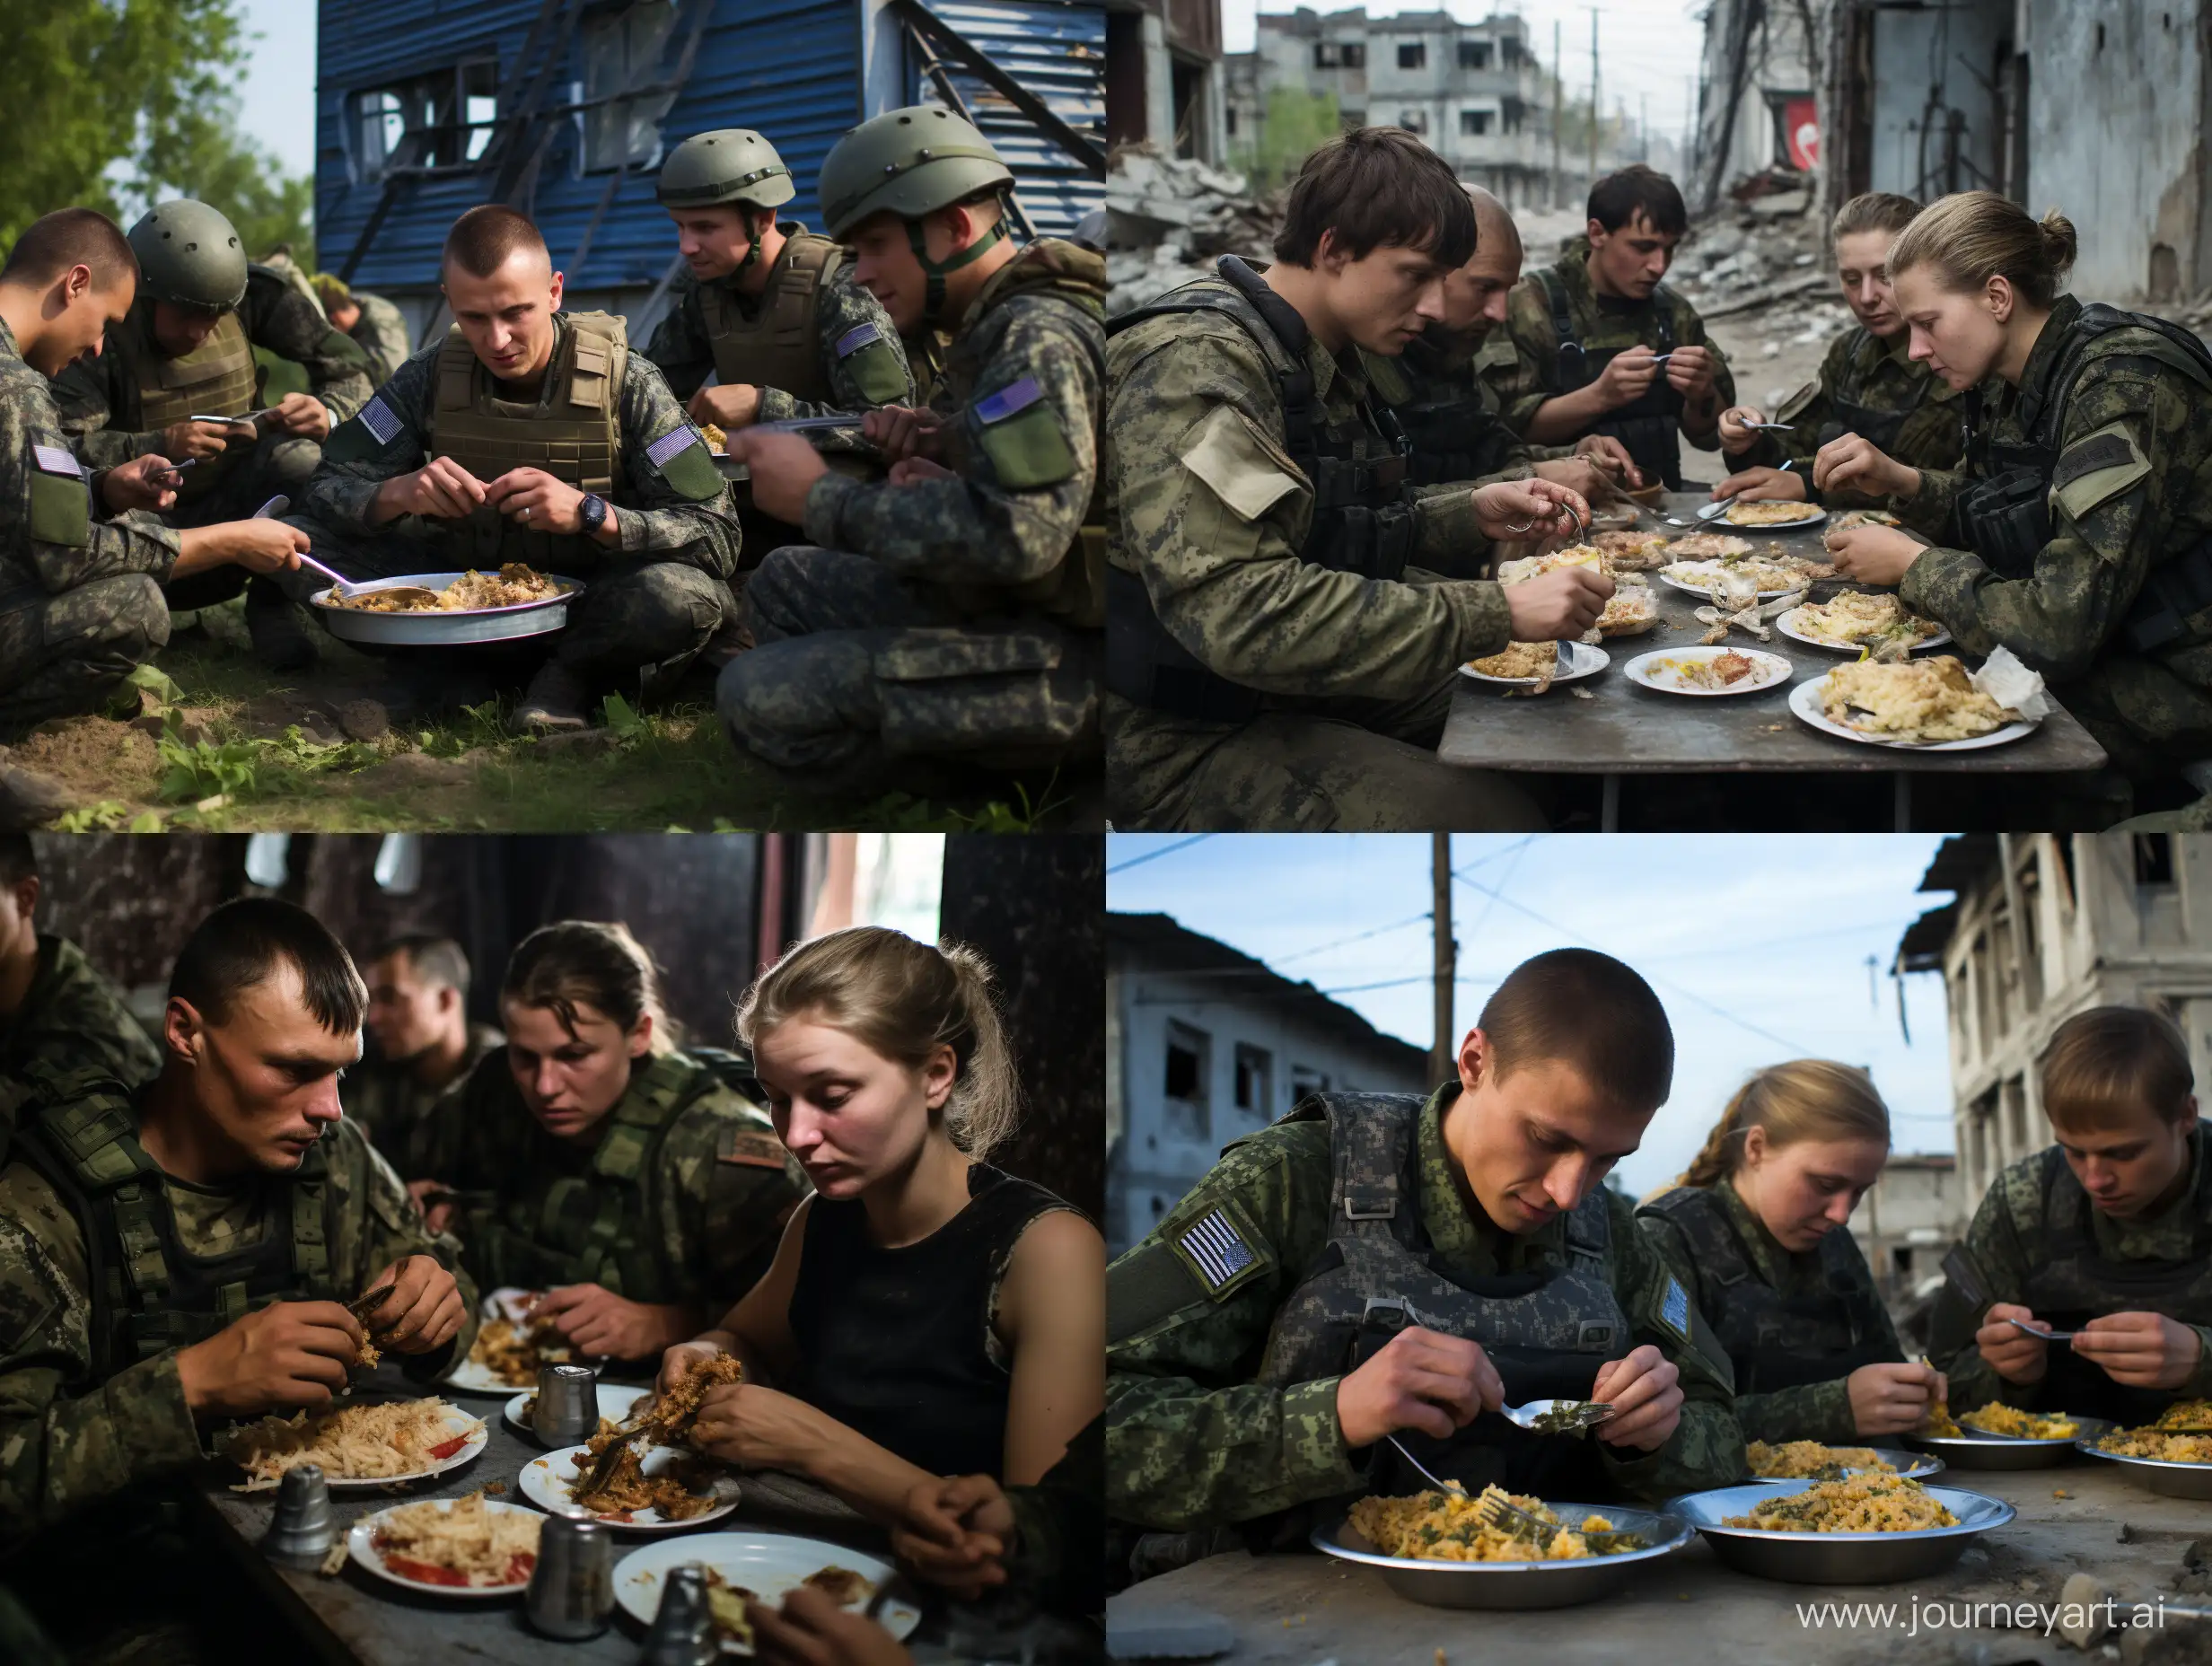 Photo Picture image of a group of 11 Ukrainian heavy equipped male and female soliders with helmet and camo battlesuit, eating together, during battle in Philippines city, photography, 3.6mm, f/2.4, ISO: 117, Exposure time: 1/60s, photo realistic, raw, real image, 2006, no bokeh, looking at camera